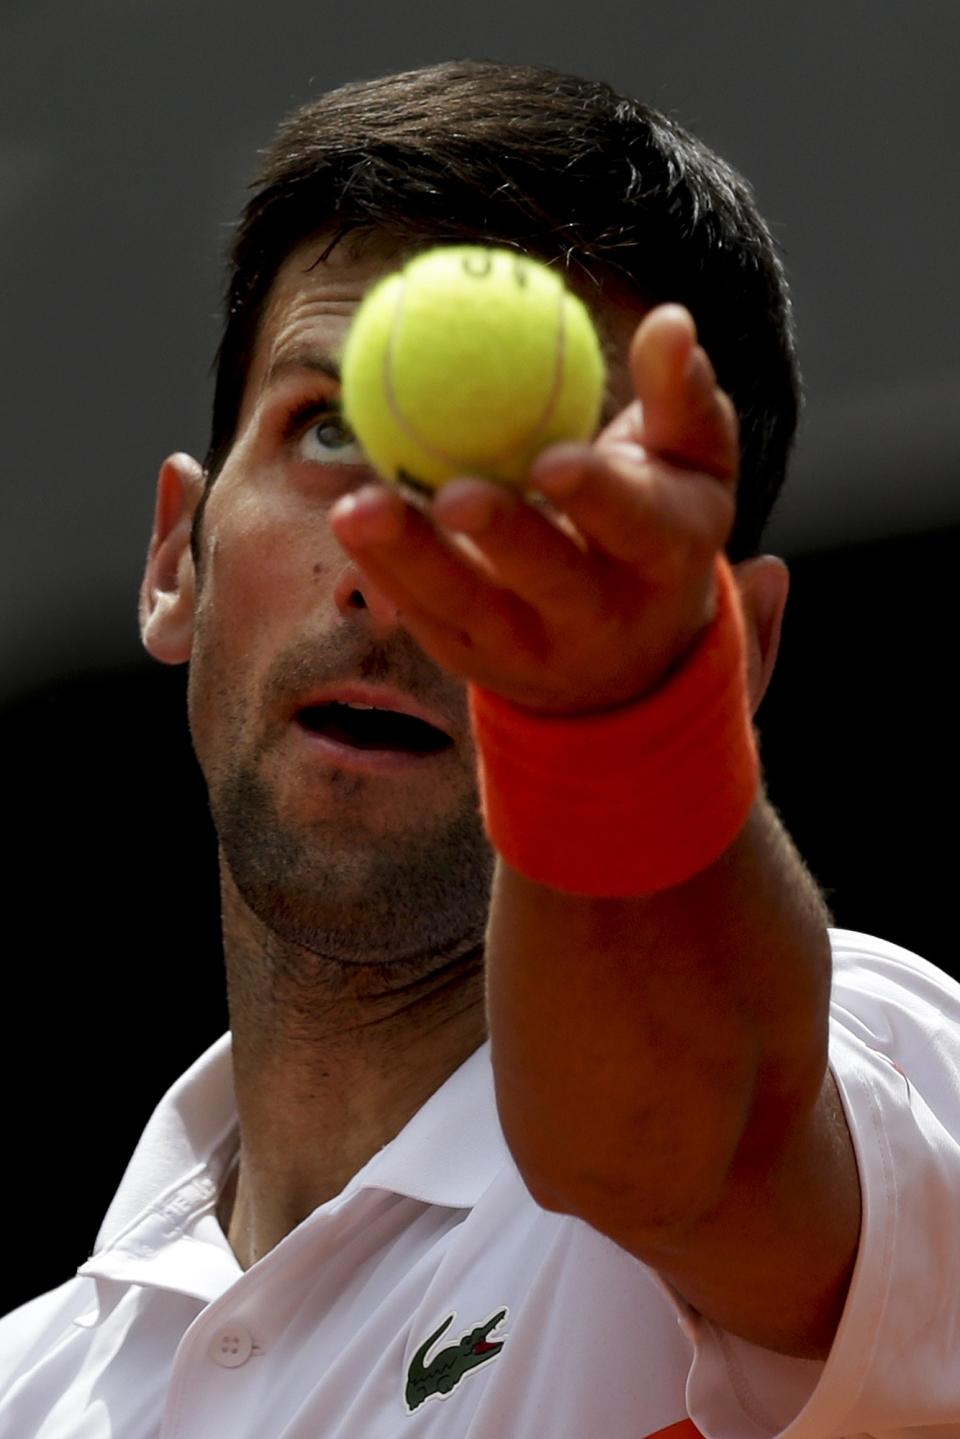 Novak Djokovic, from Serbia, serves to Taylor Fritz, from United States during the Madrid Open tennis tournament in Madrid, Tuesday, May 7, 2019. (AP Photo/Bernat Armangue)